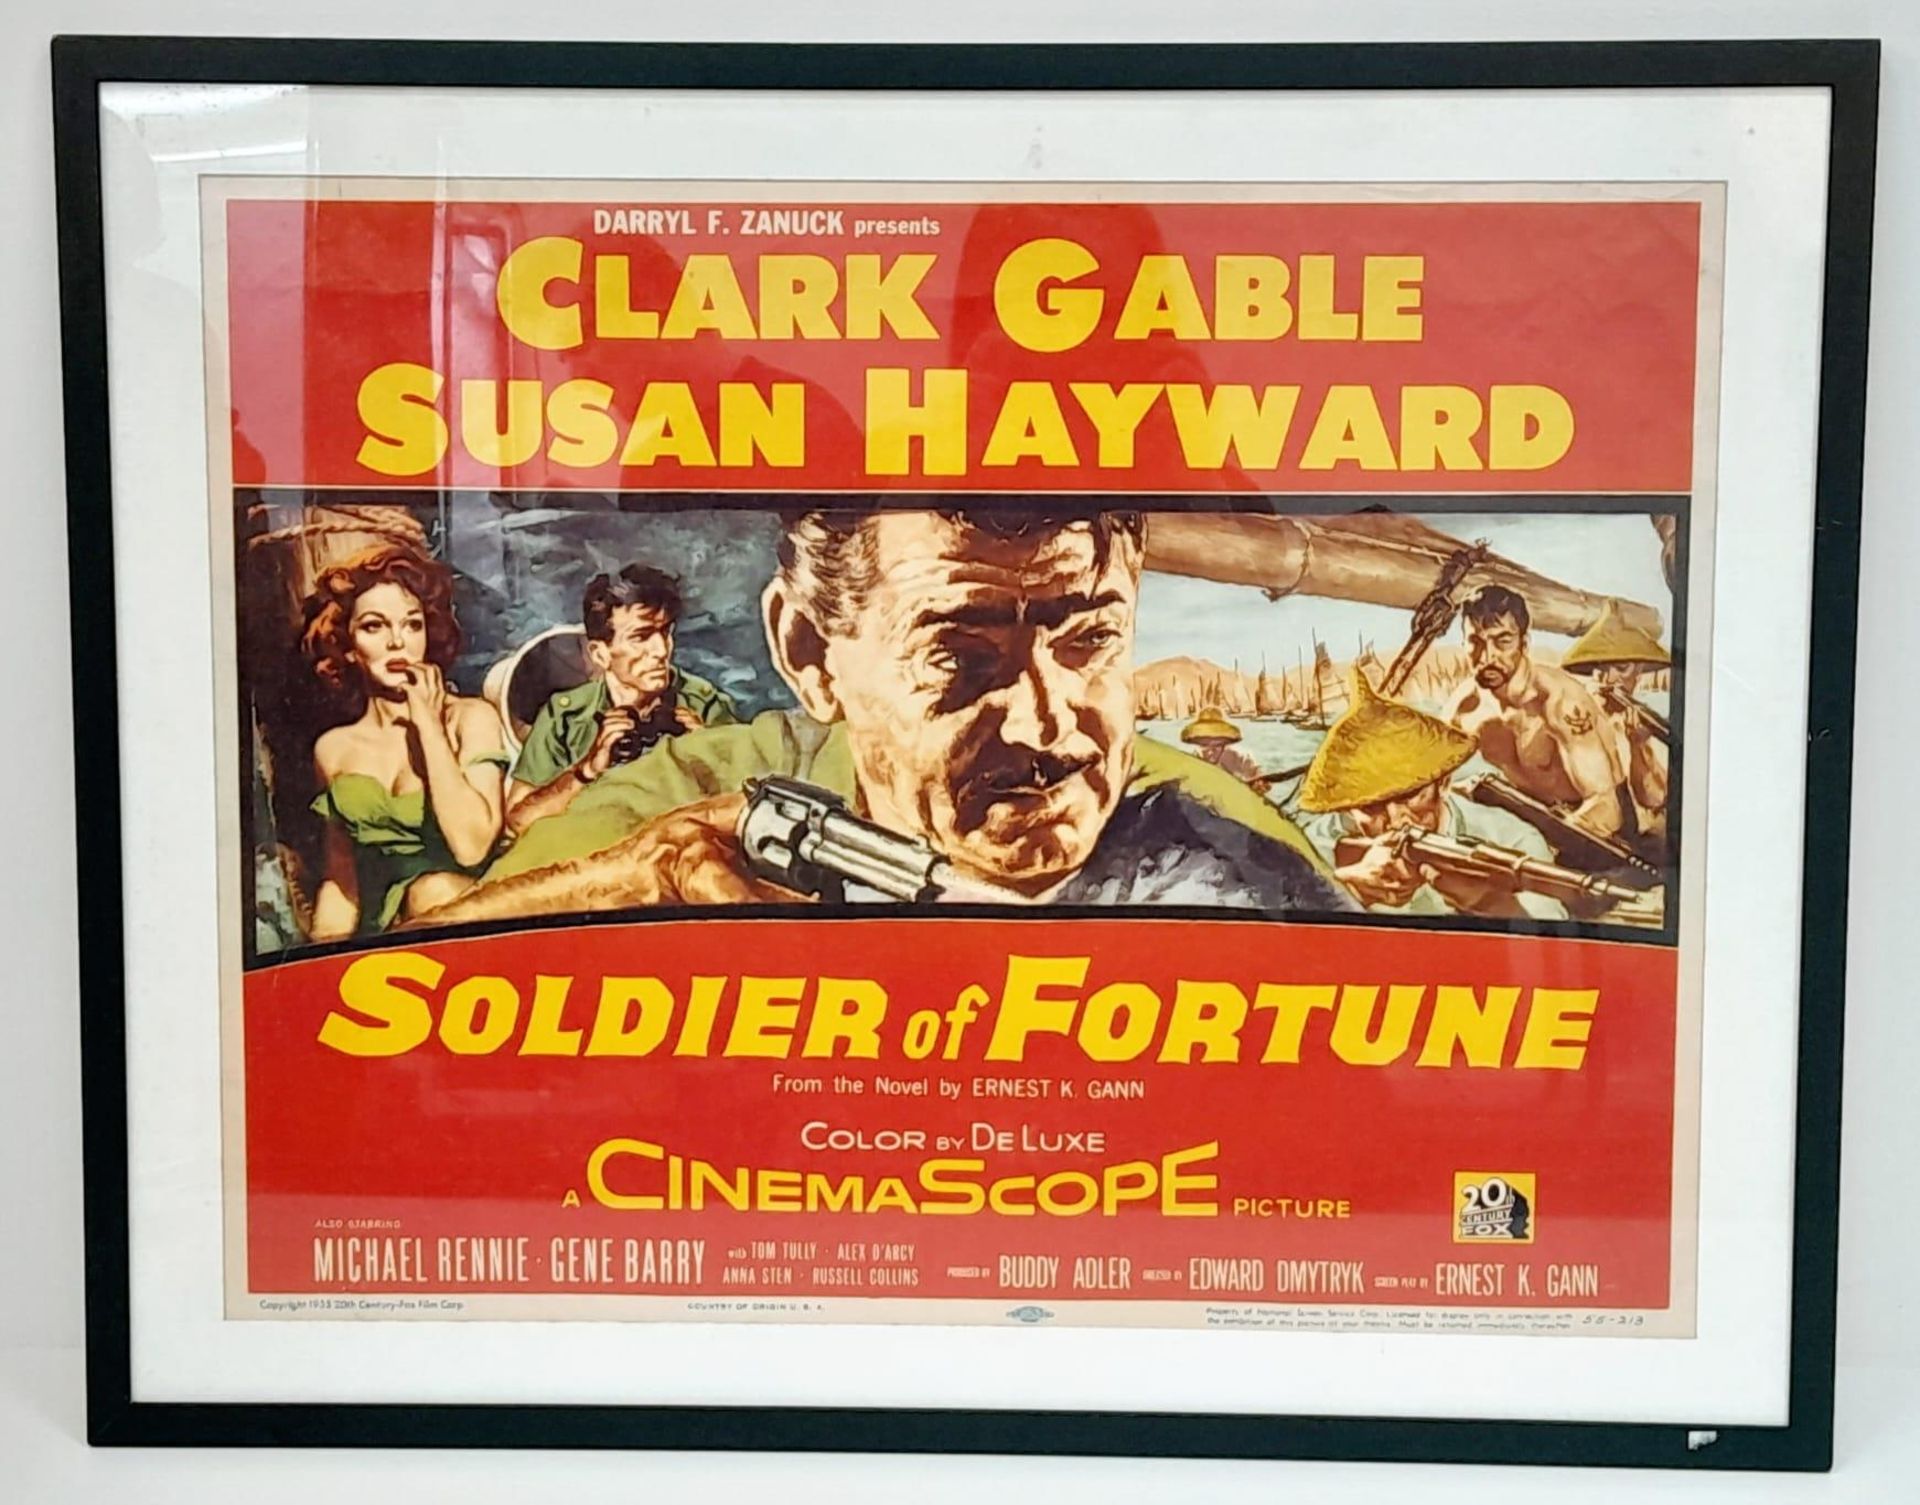 A FRAMED MOVIE POSTER FOR "SOLDIERS OF FORTUNE" STARRING CLARK GABLE AND SUSAN HAYWOOD .CIRCA 1955 .